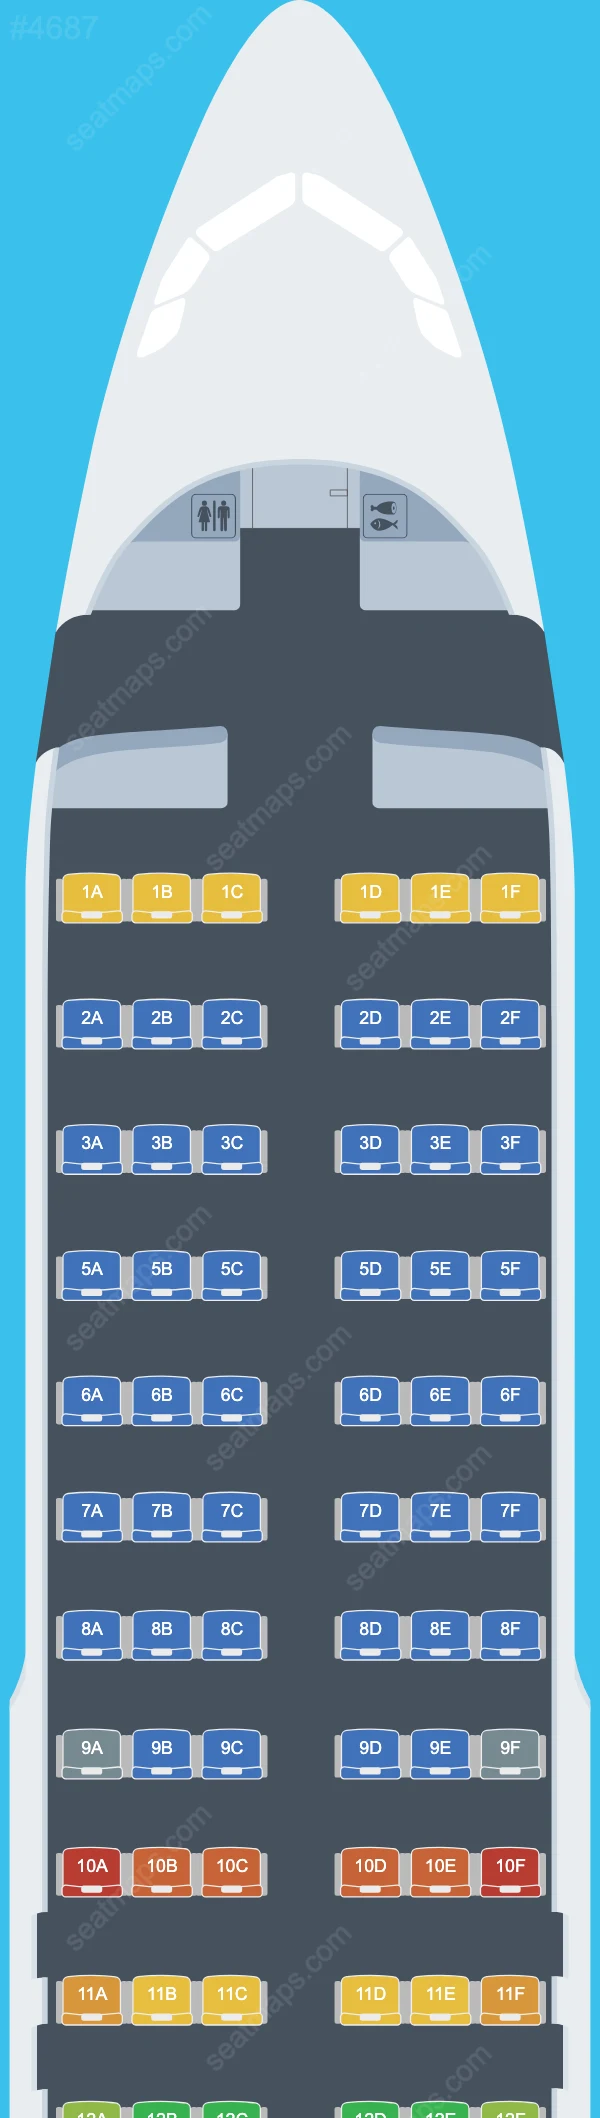 StarFlyer Airbus A320 Seat Maps A320-200